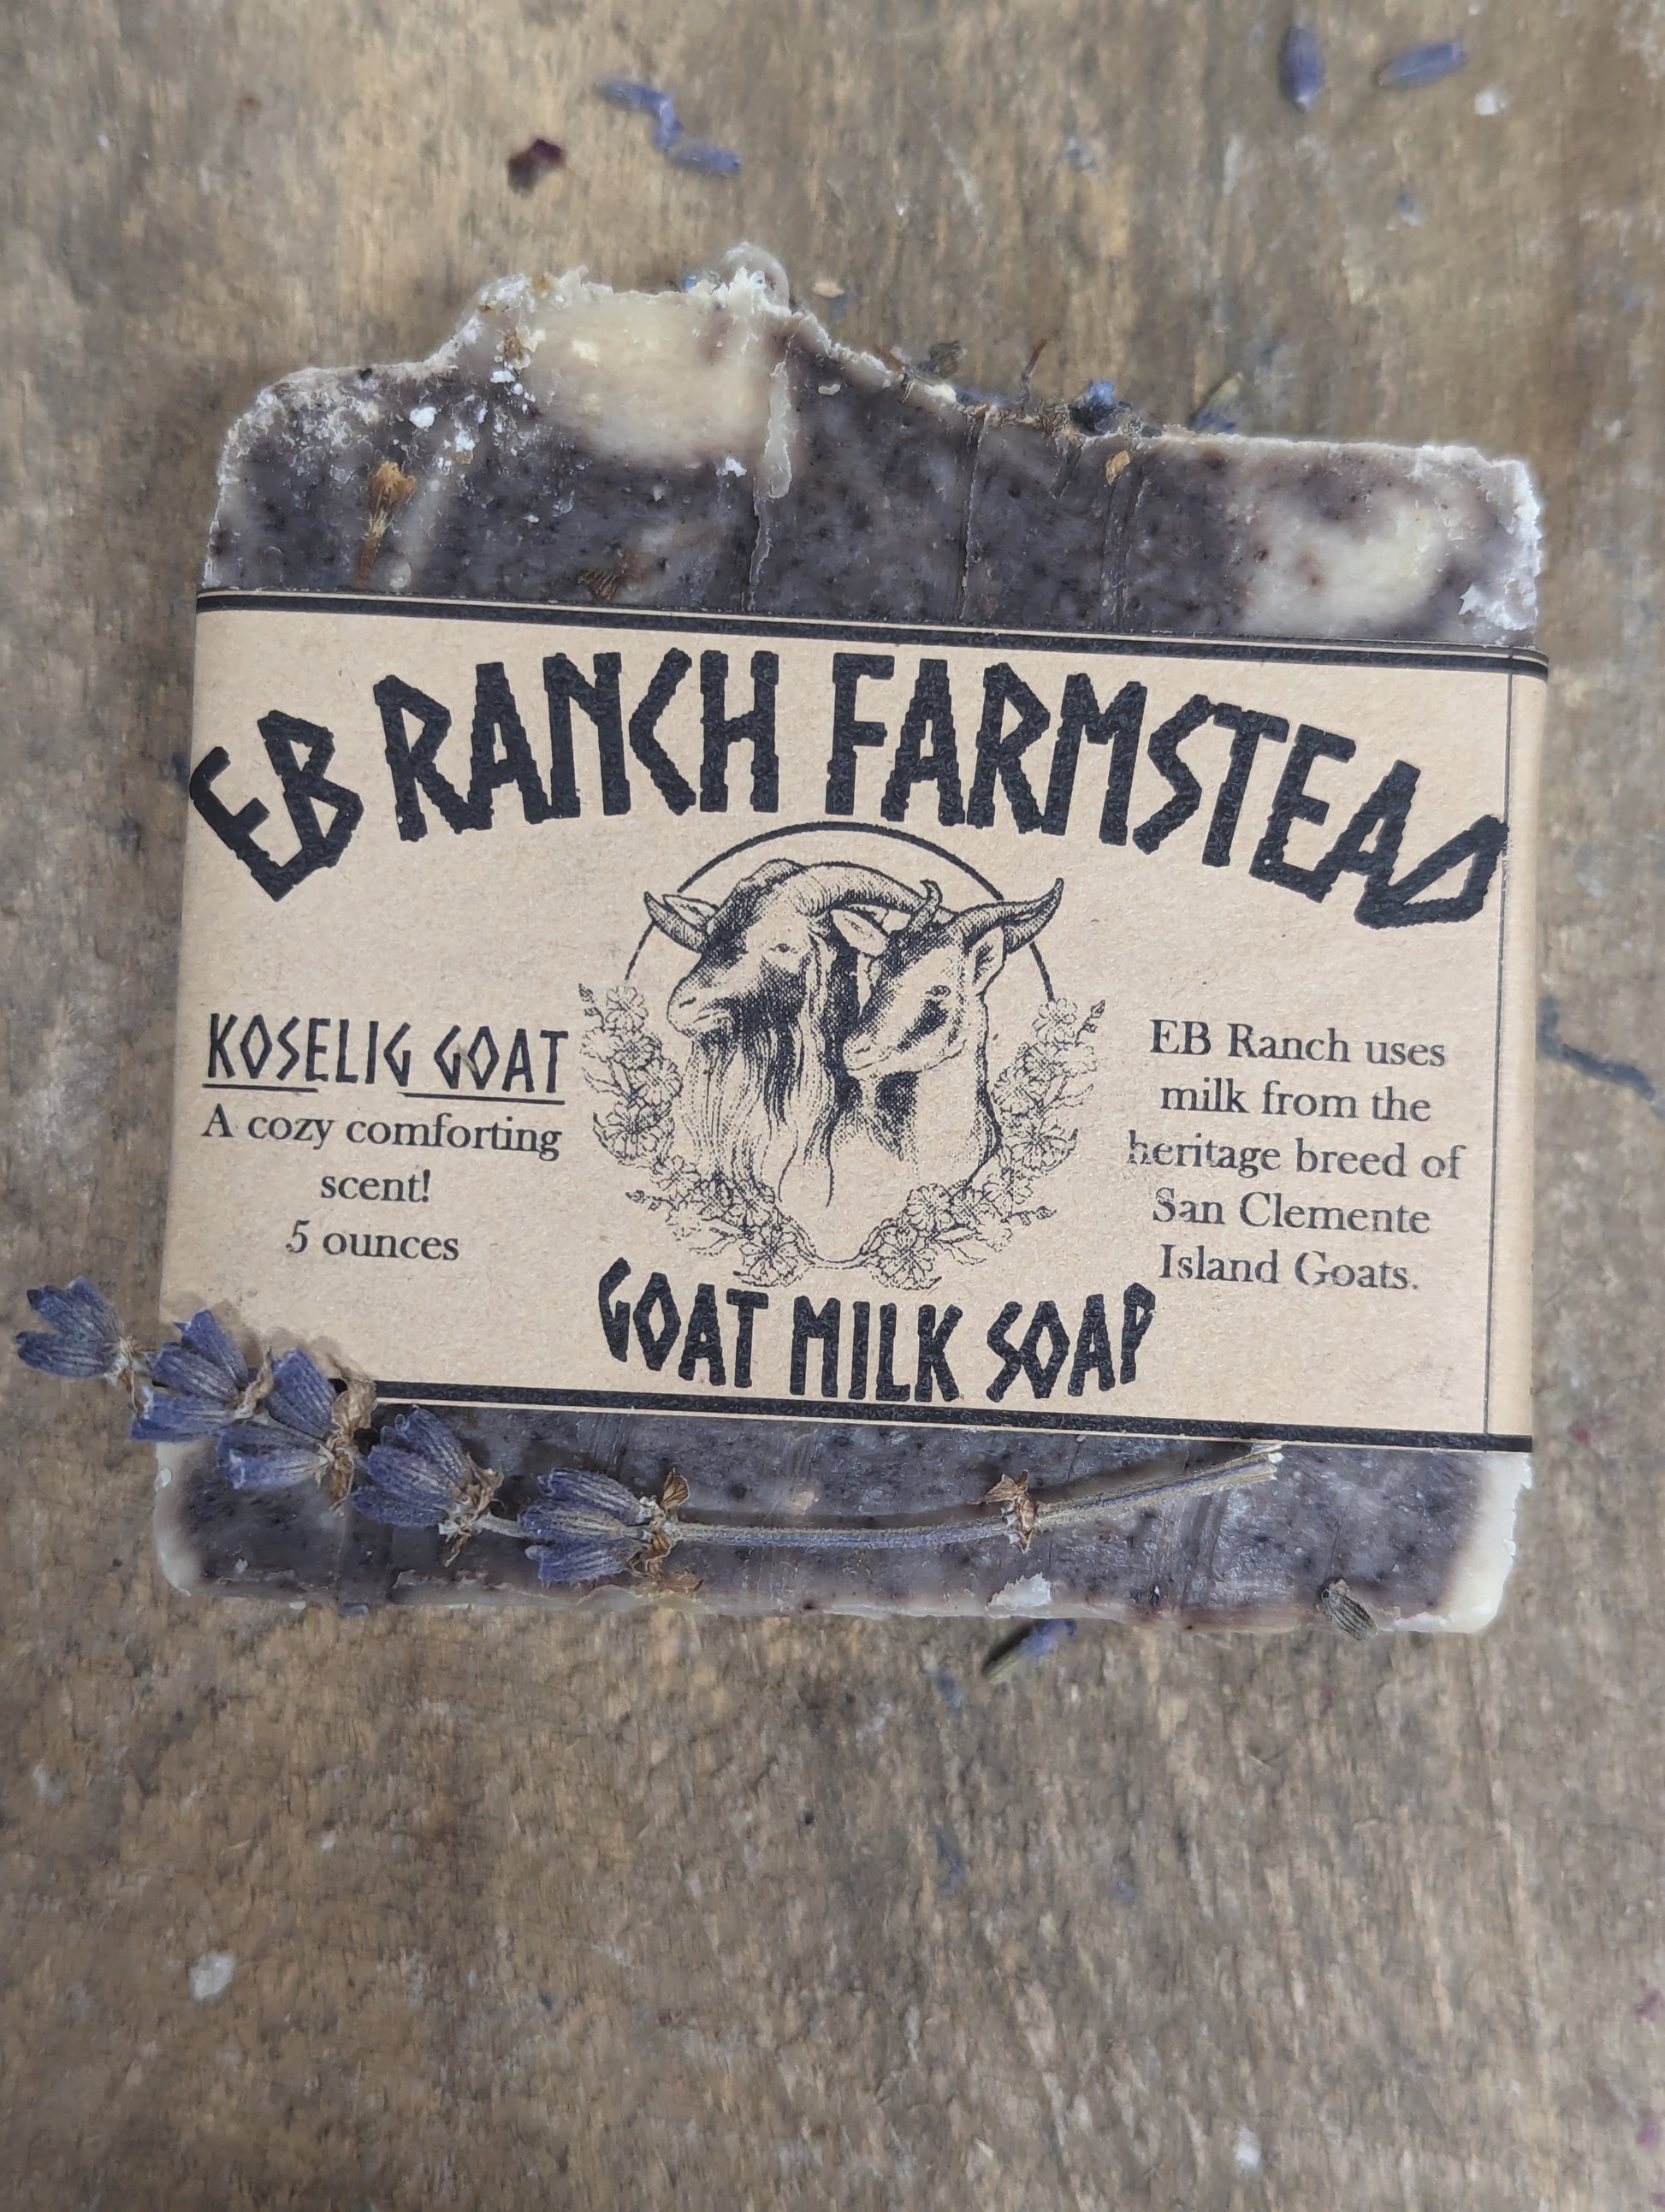 all natural soap, organic soap, real soap, handcrafted soap, homemade soap, natural body care, lavender soap, patchouli soap, lavender patchouli goat milk soap, goat milk soap, the best soap, soap near me, san clemente Island goats, 